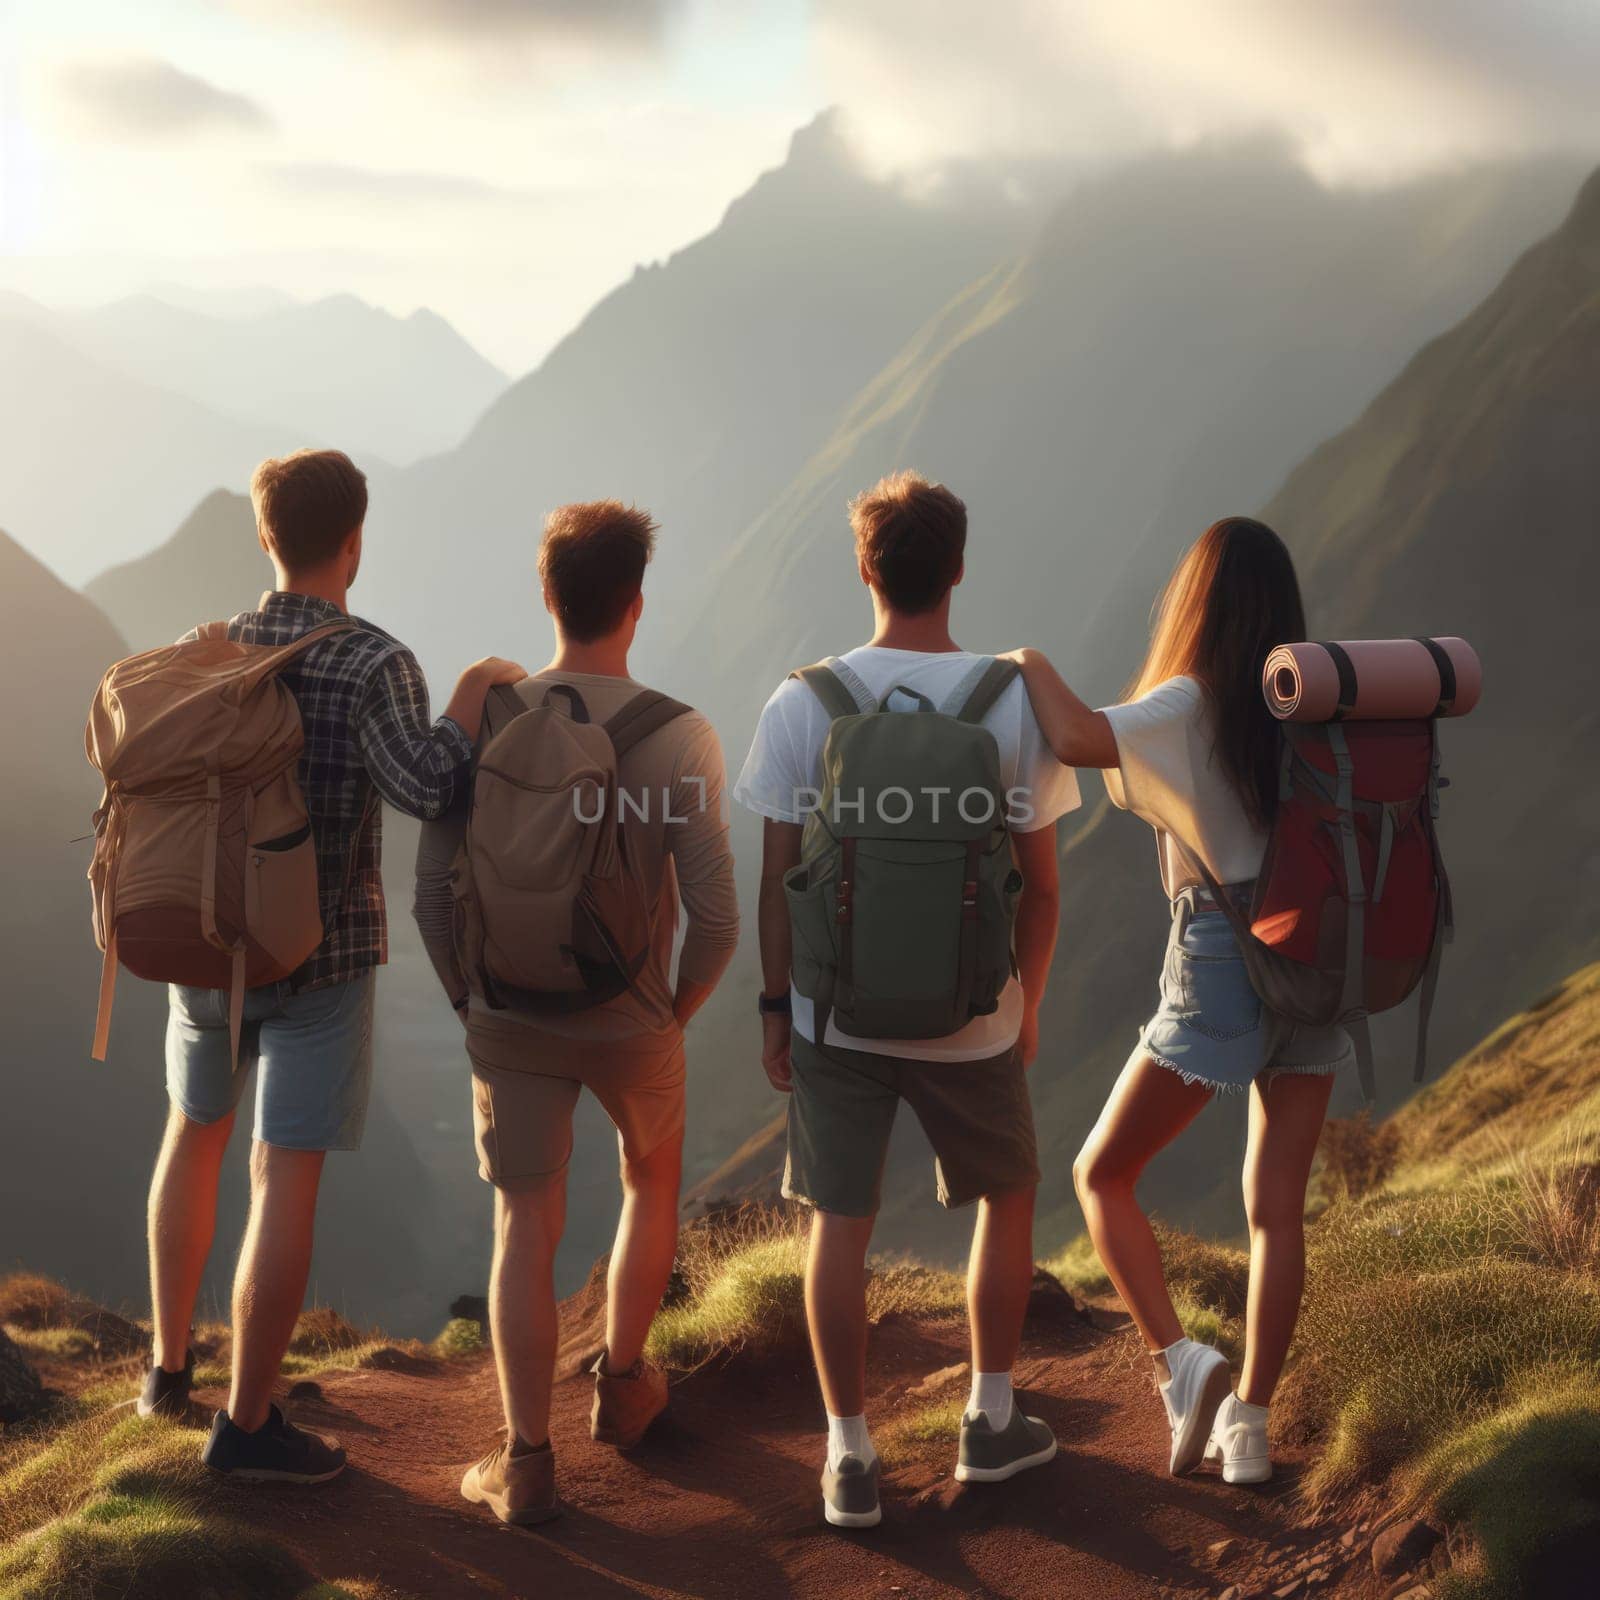 Four friends, bathed in the golden light of sunset, admire a scenic mountain view during their hike